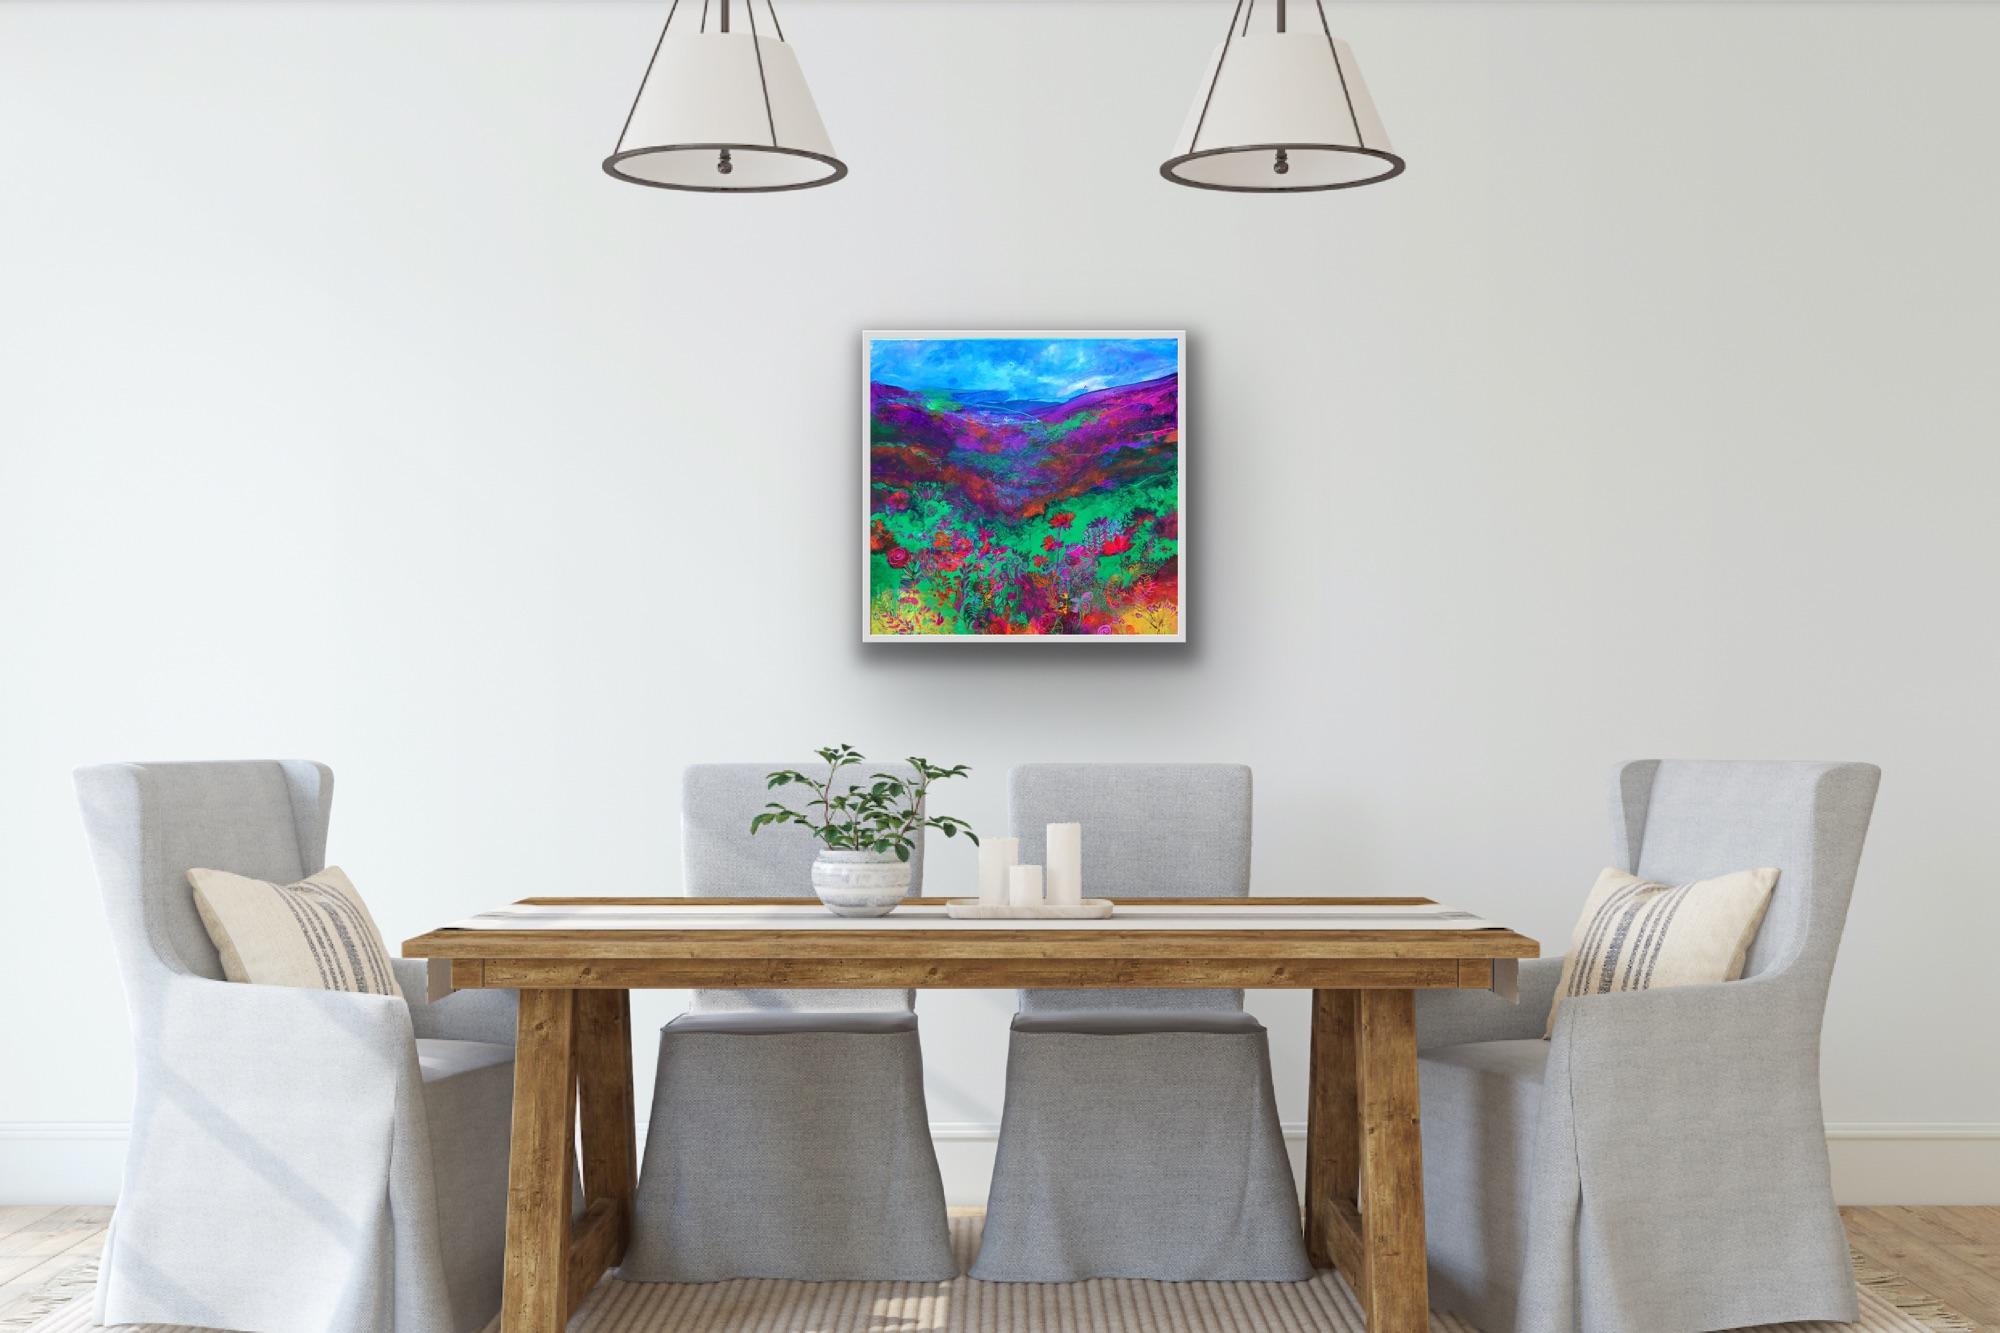 My Love [2021]
Original
Landscapes and seascapes
Acrylic on canvas
Image size: H:75 cm x W:75 cm
Complete Size of Unframed Work: H:75 cm x W:75 cm x D:1.9cm
Sold Unframed
Please note that insitu images are purely an indication of how a piece may